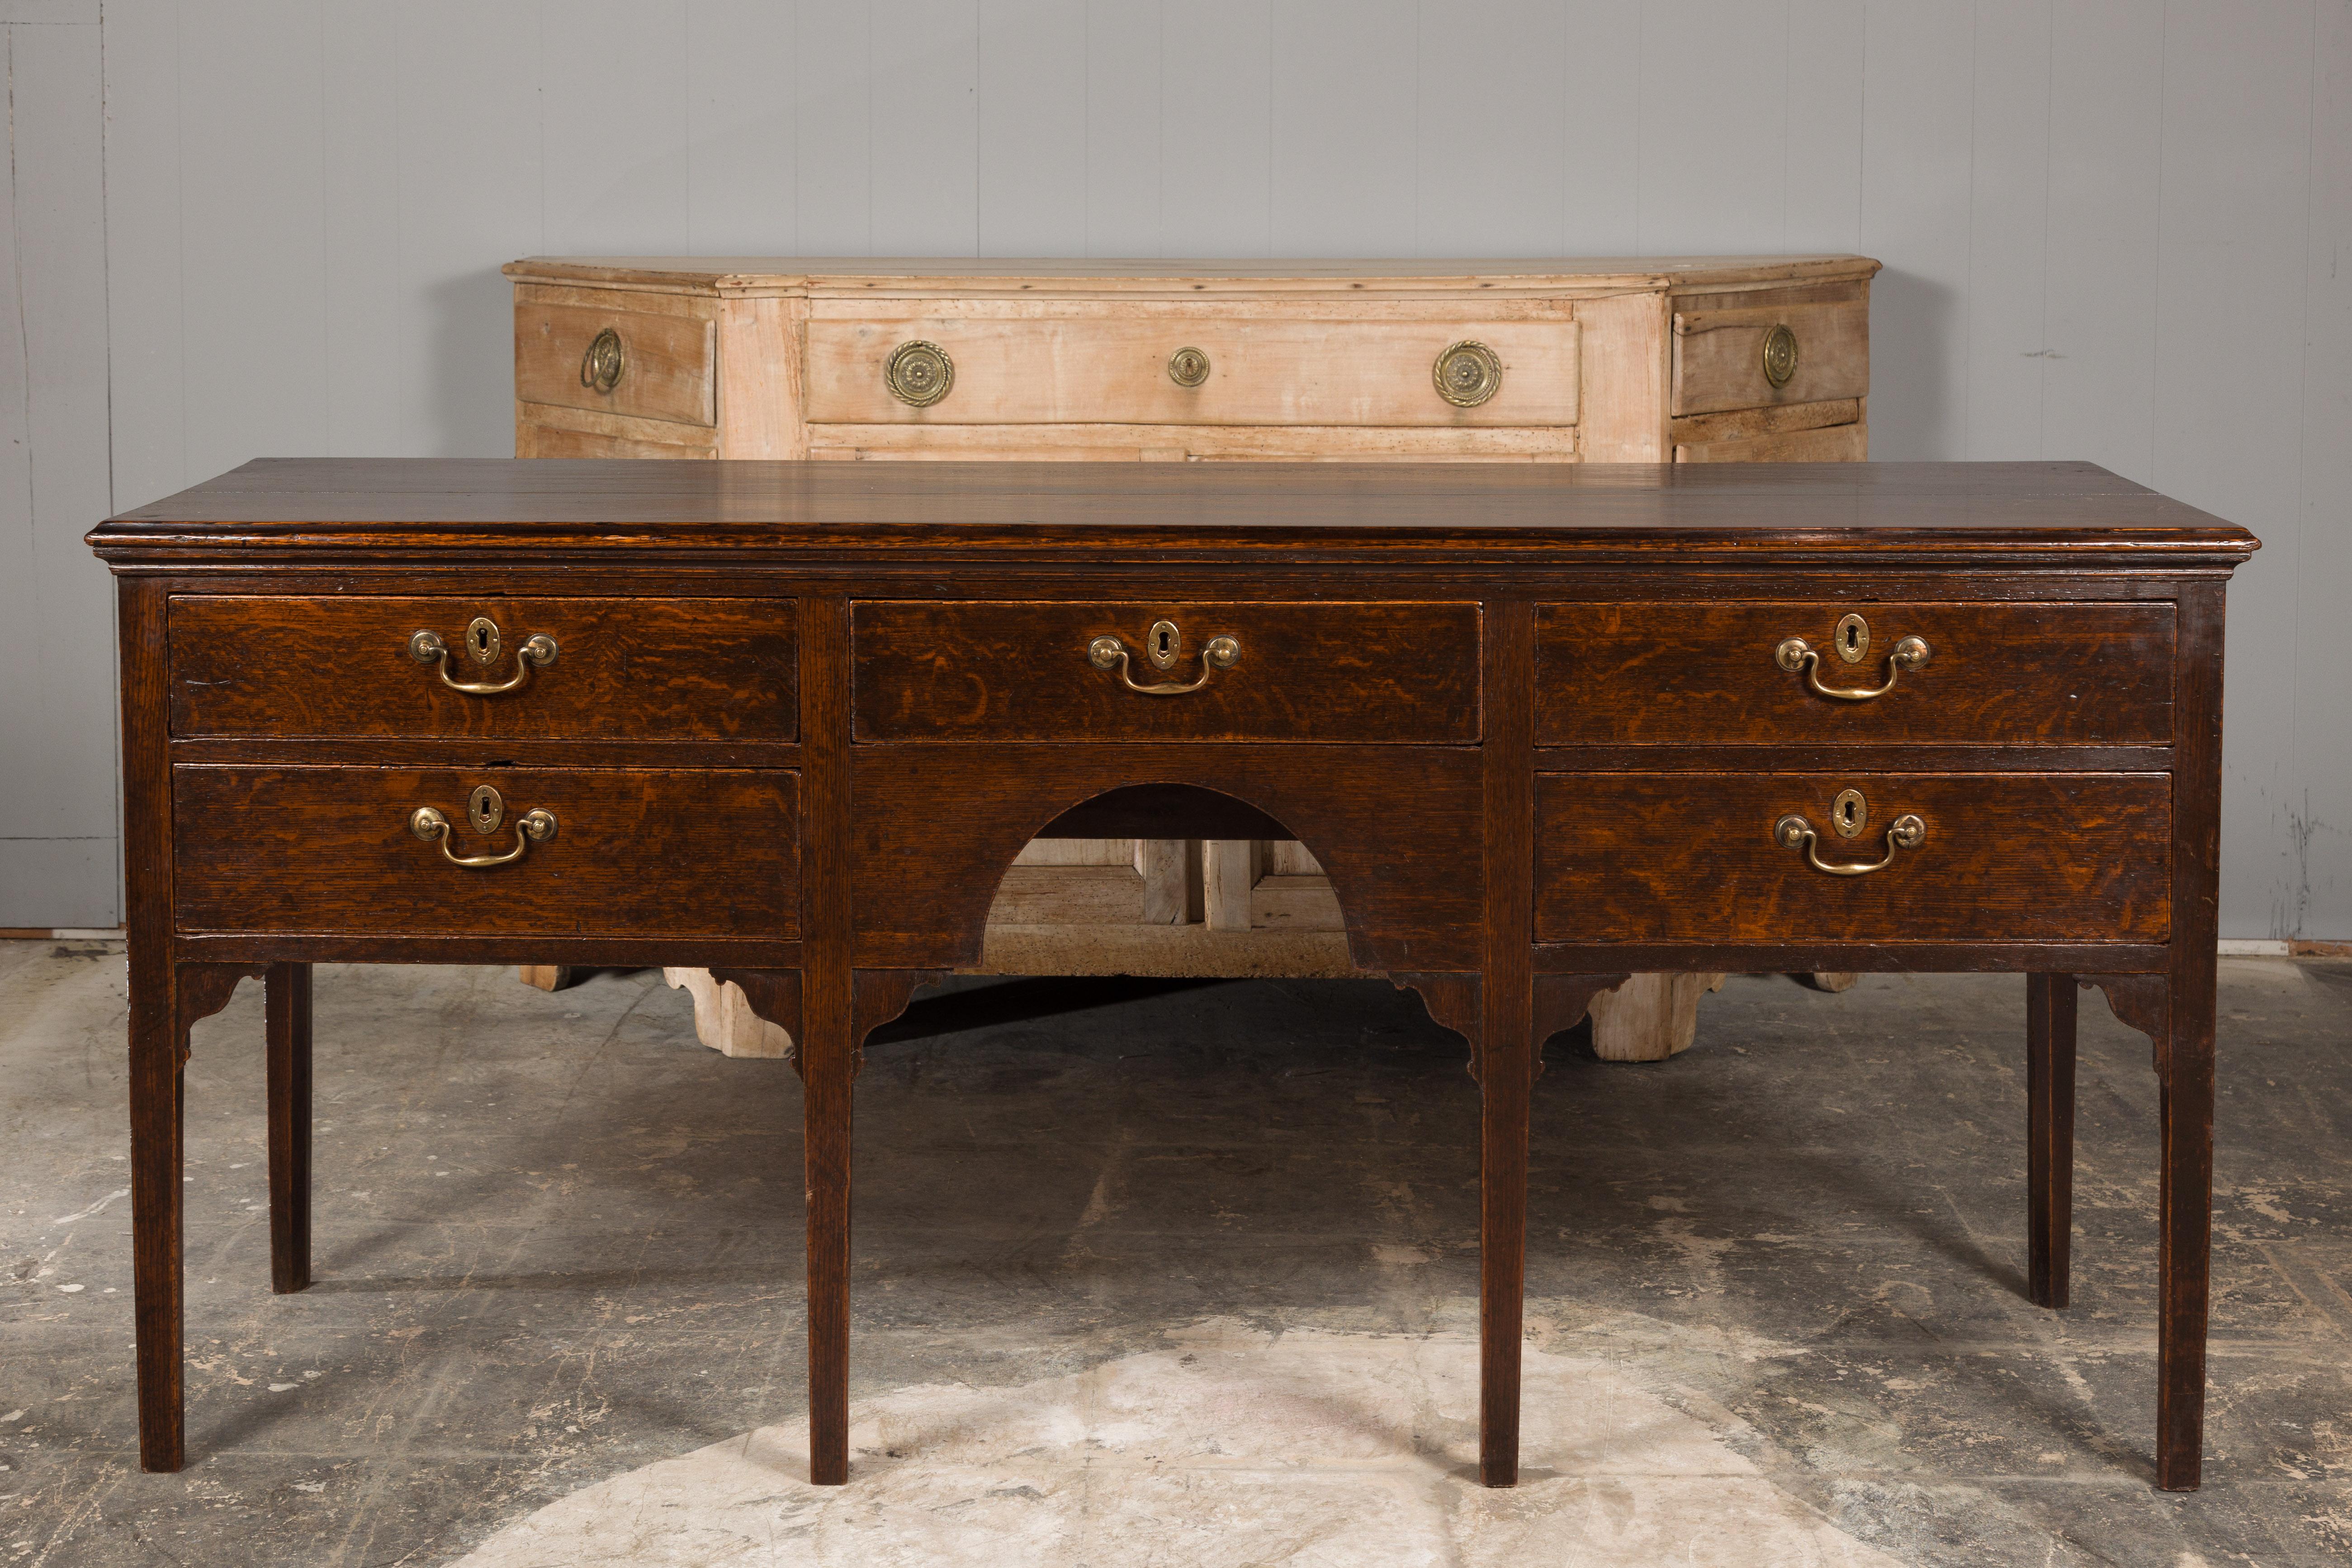 An English oak sideboard from the 19th century with five drawers, brass hardware, carved spandrels and straight legs. Imbue your interior with an air of timeless sophistication with this exquisite English oak sideboard hailing from the 19th century.